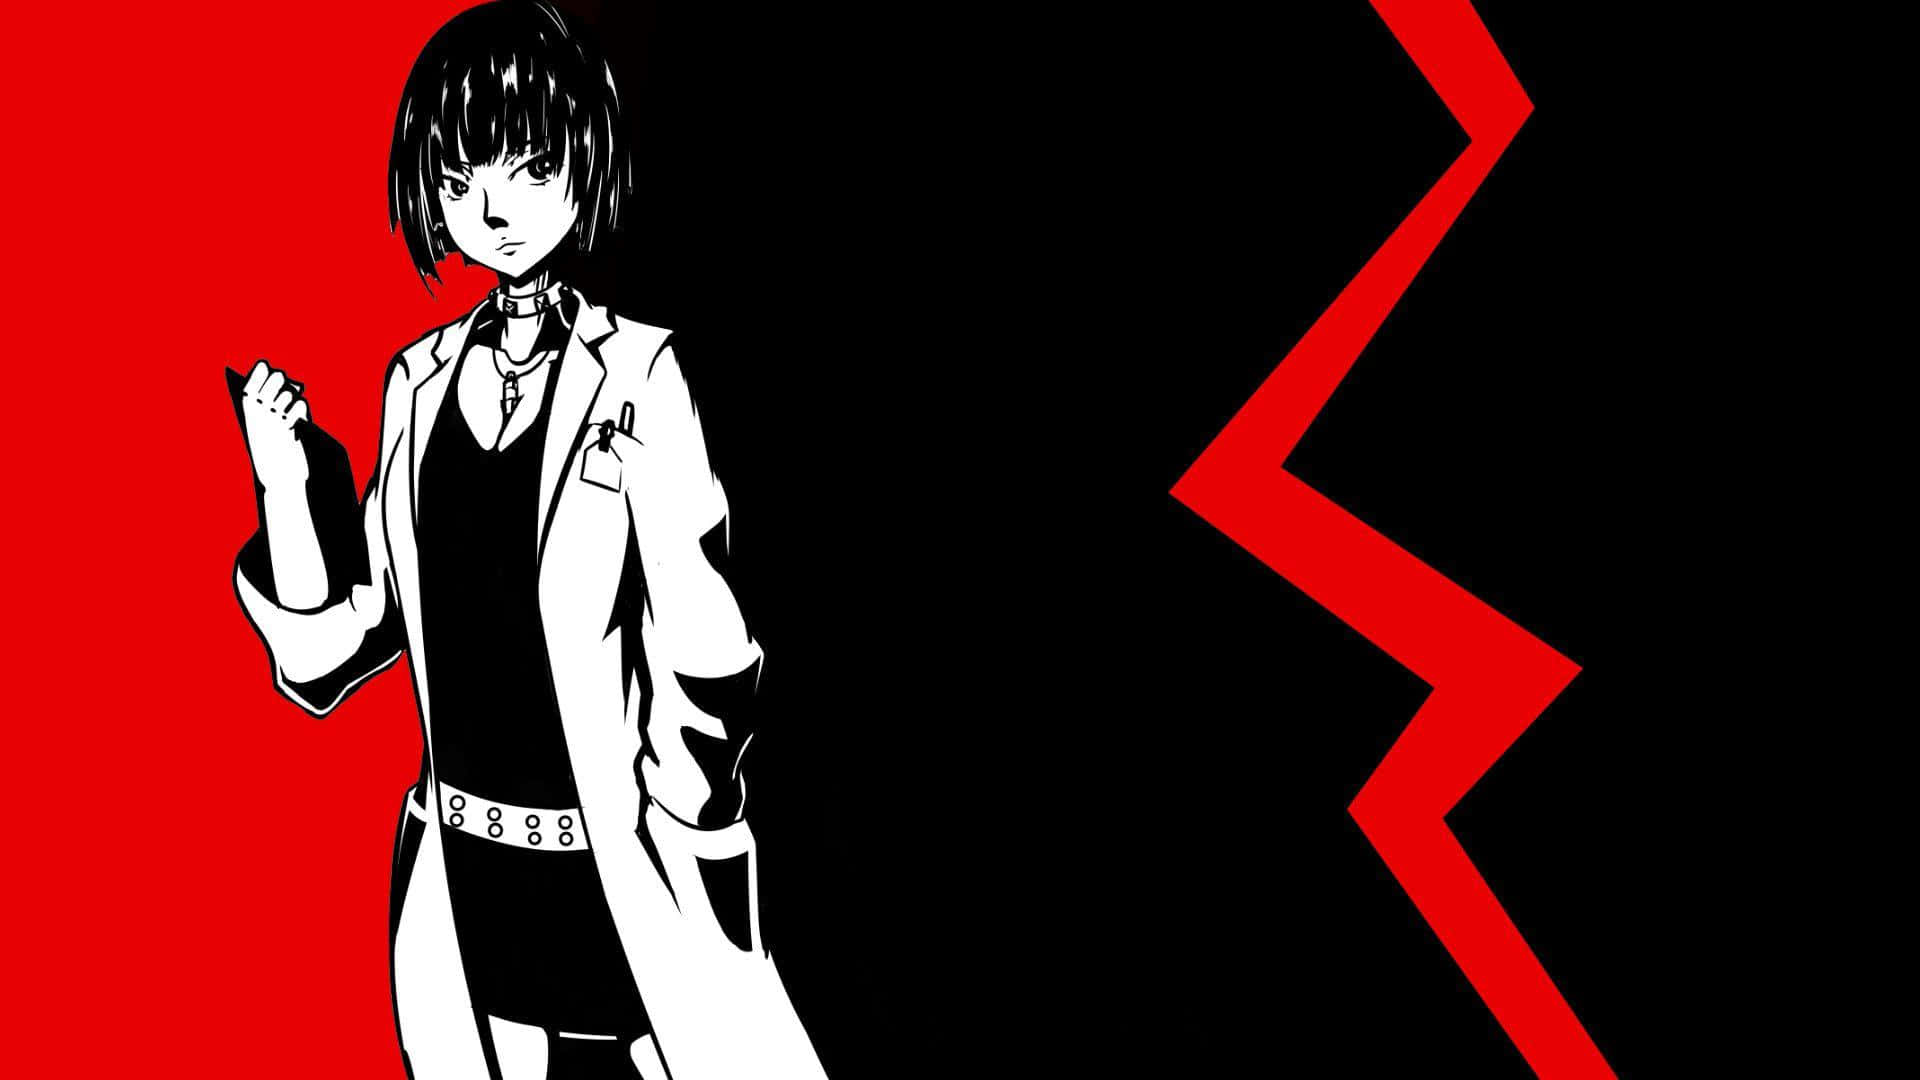 A Girl In A White Coat Standing In Front Of A Red And Black Background